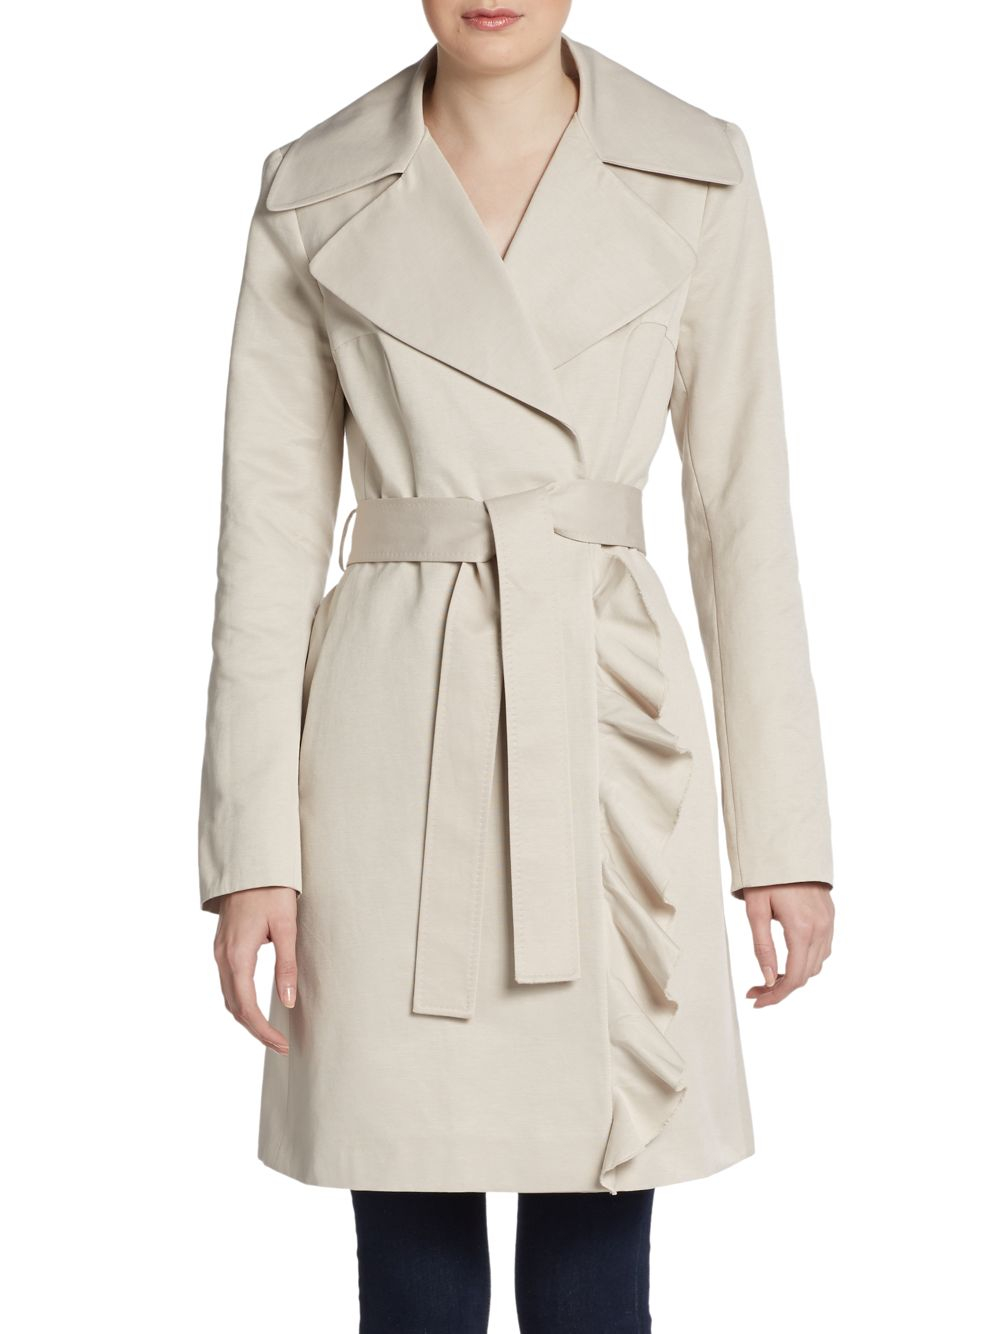 Lyst - T Tahari Eve Ruffle-Trimmed Trench Coat in Natural